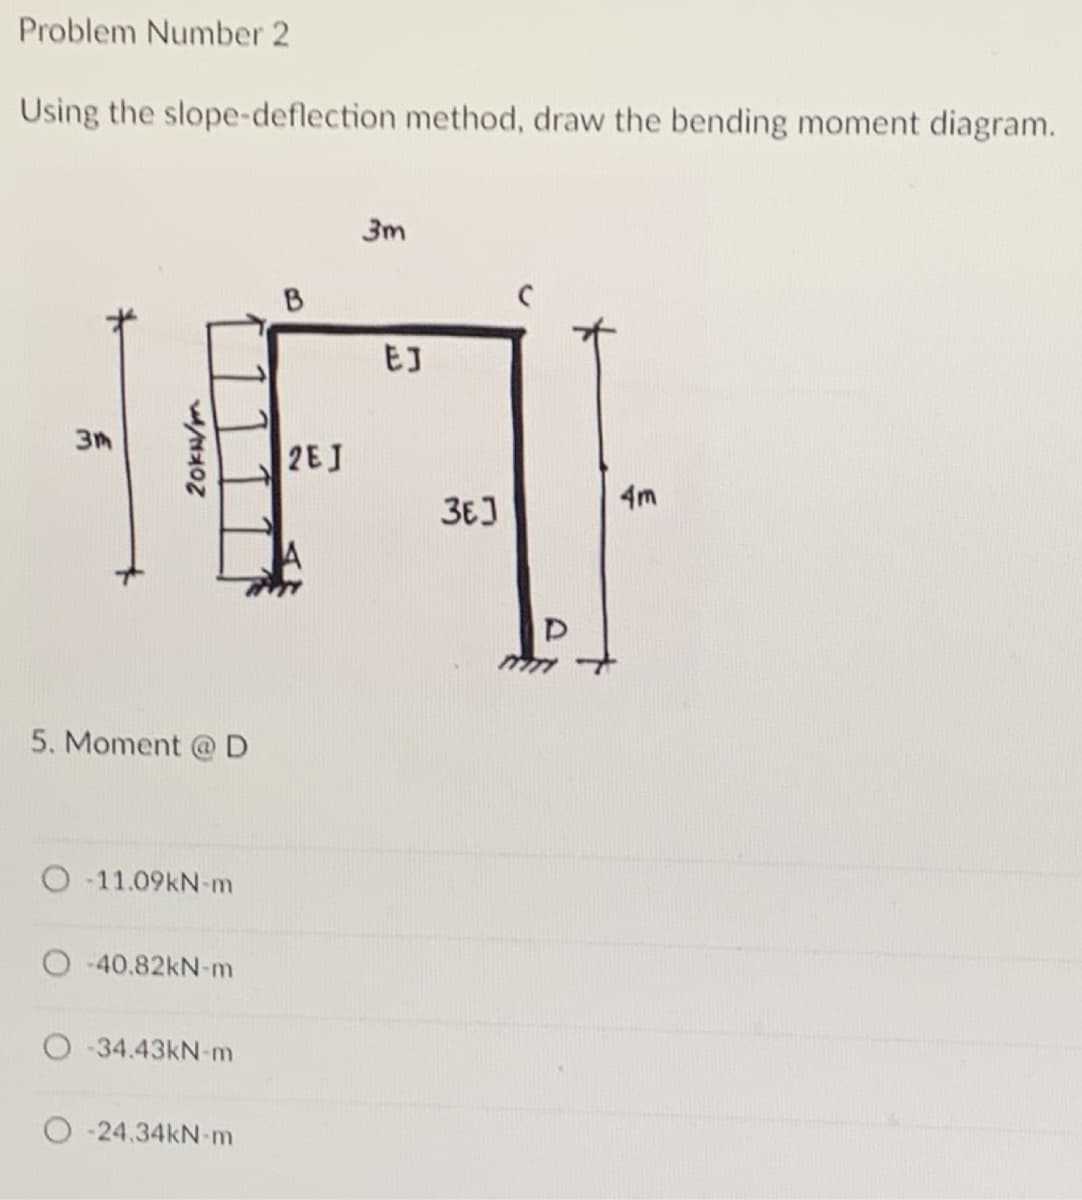 Problem Number 2
Using the slope-deflection method, draw the bending moment diagram.
3m
B
3m
4m
5. Moment @ D
O-11.09kN-m
-40.82kN-m
-34.43kN-m
-24.34kN-m
20kN/m
2EJ
EJ
36]